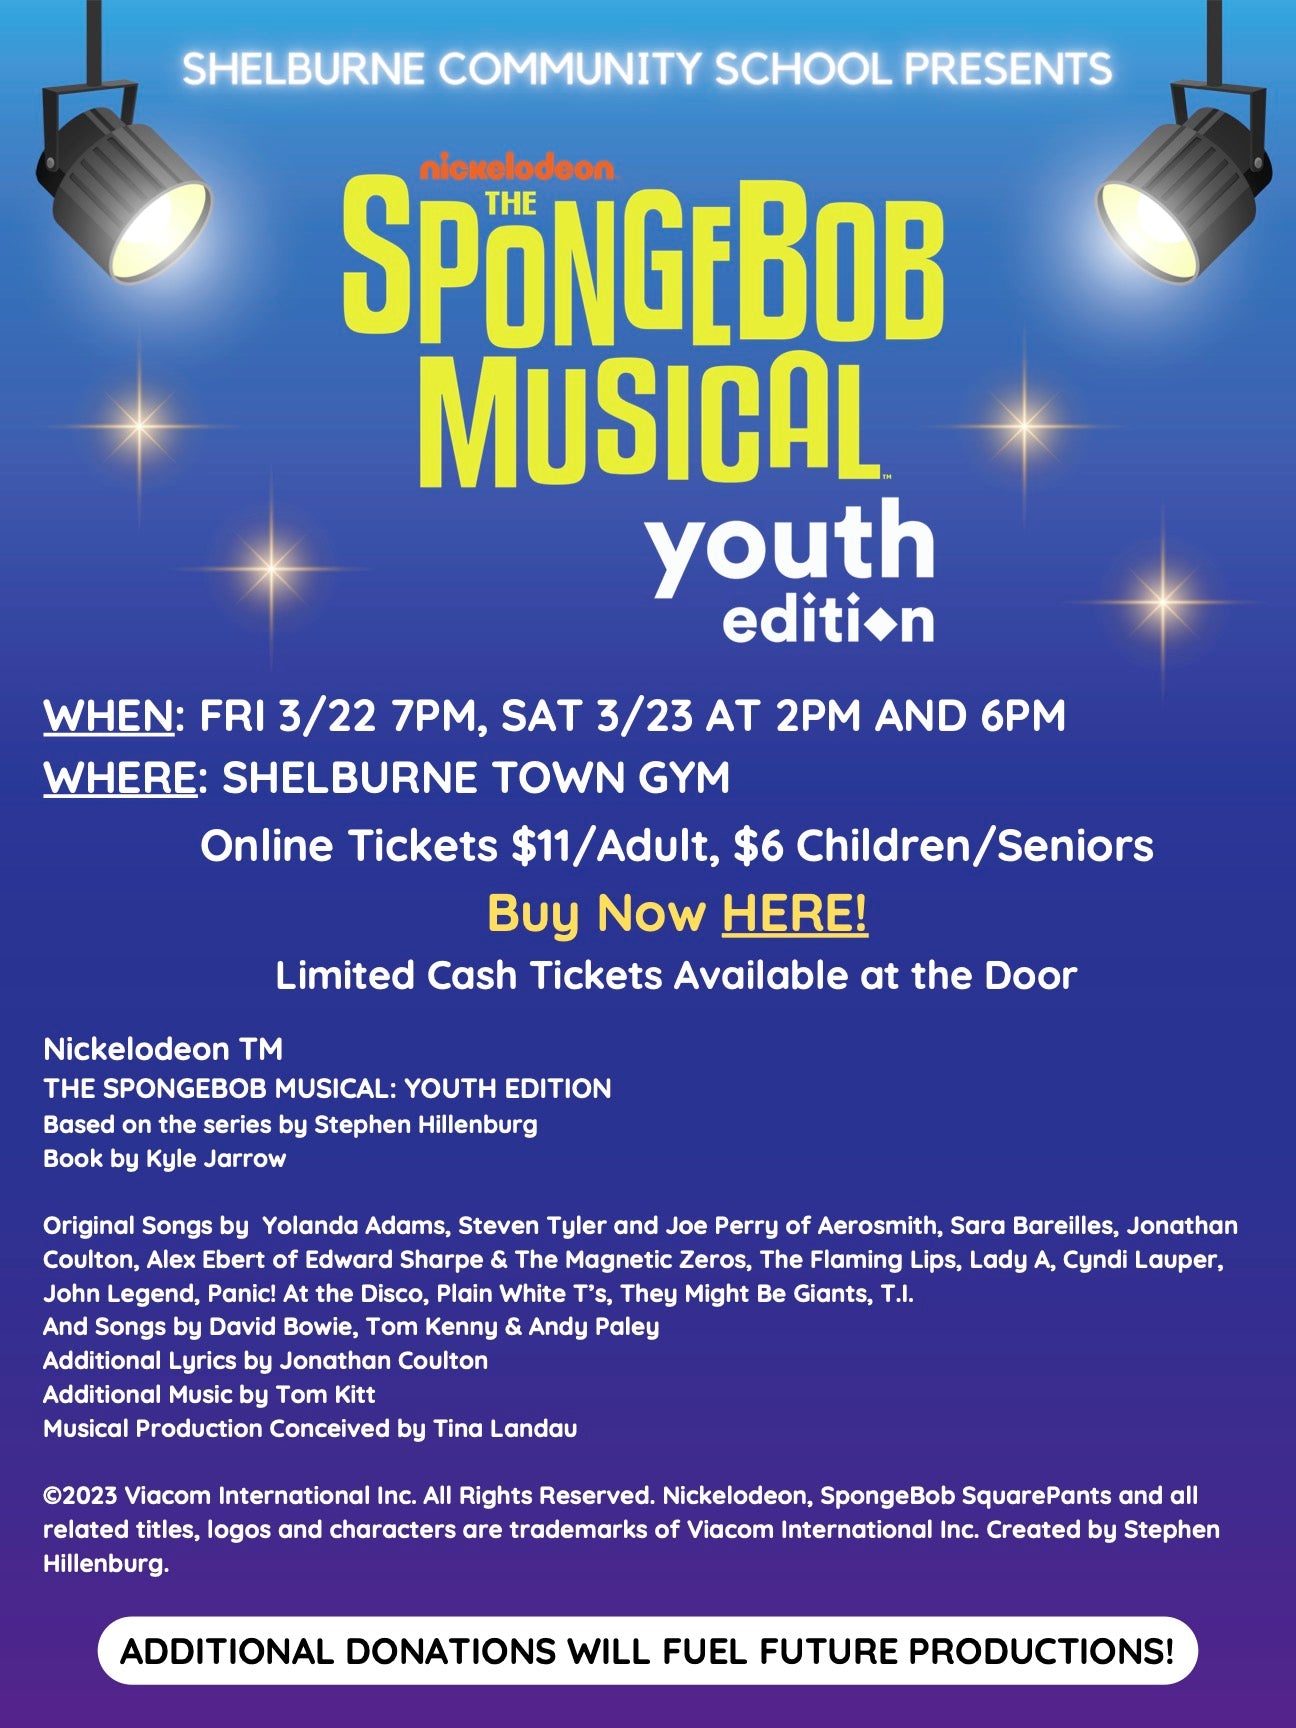 The SpongeBob Musical: Youth Edition